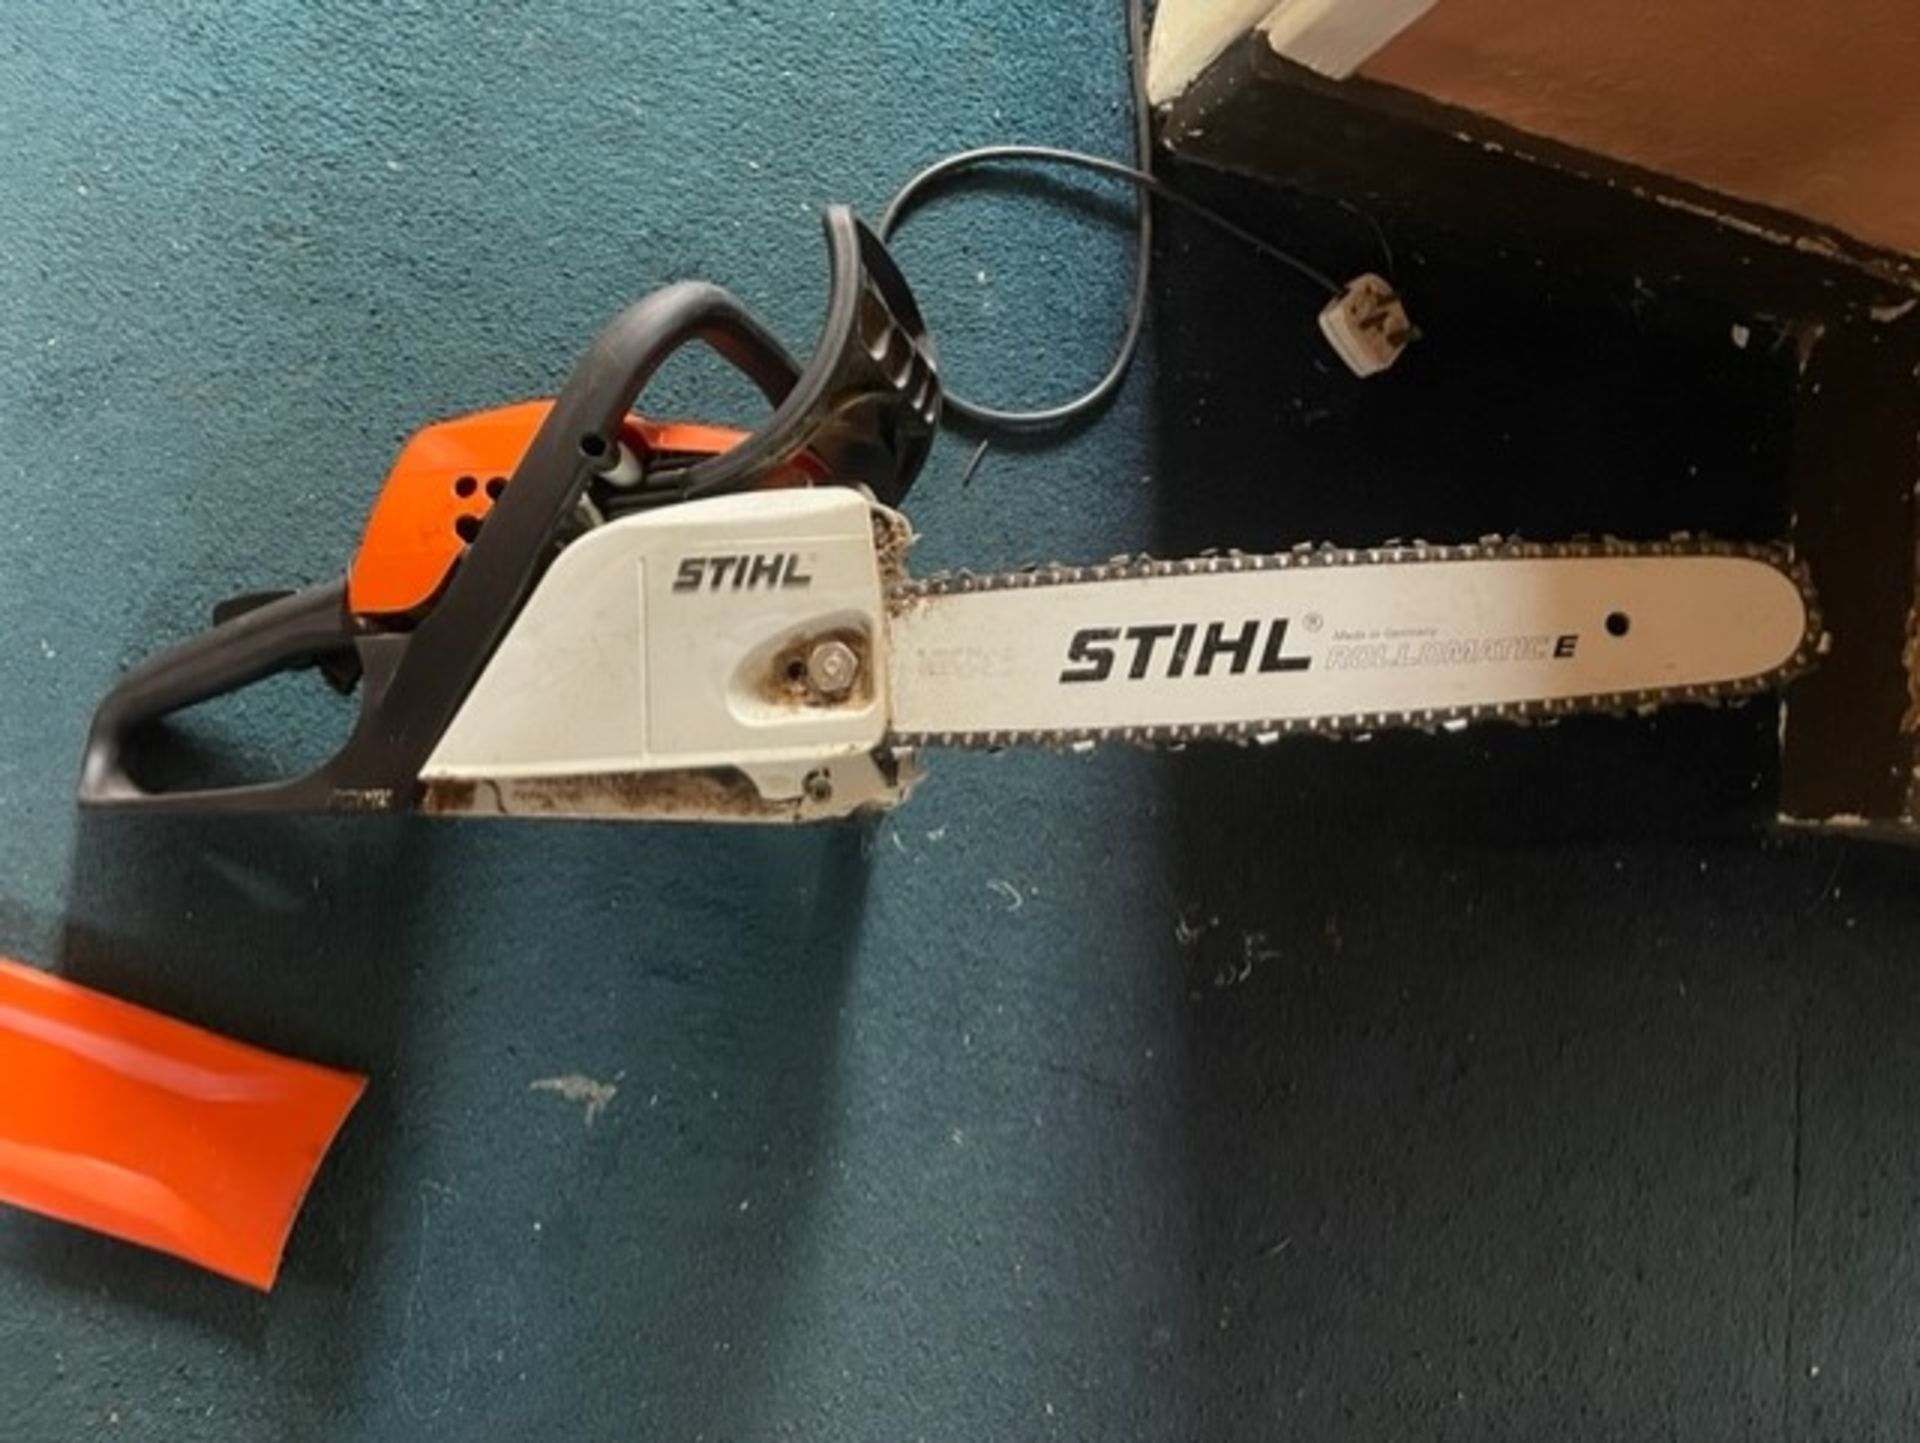 Stihl 181 used only once to cut a branch damaged shoulder forces sale but this machine has doing - Image 3 of 3